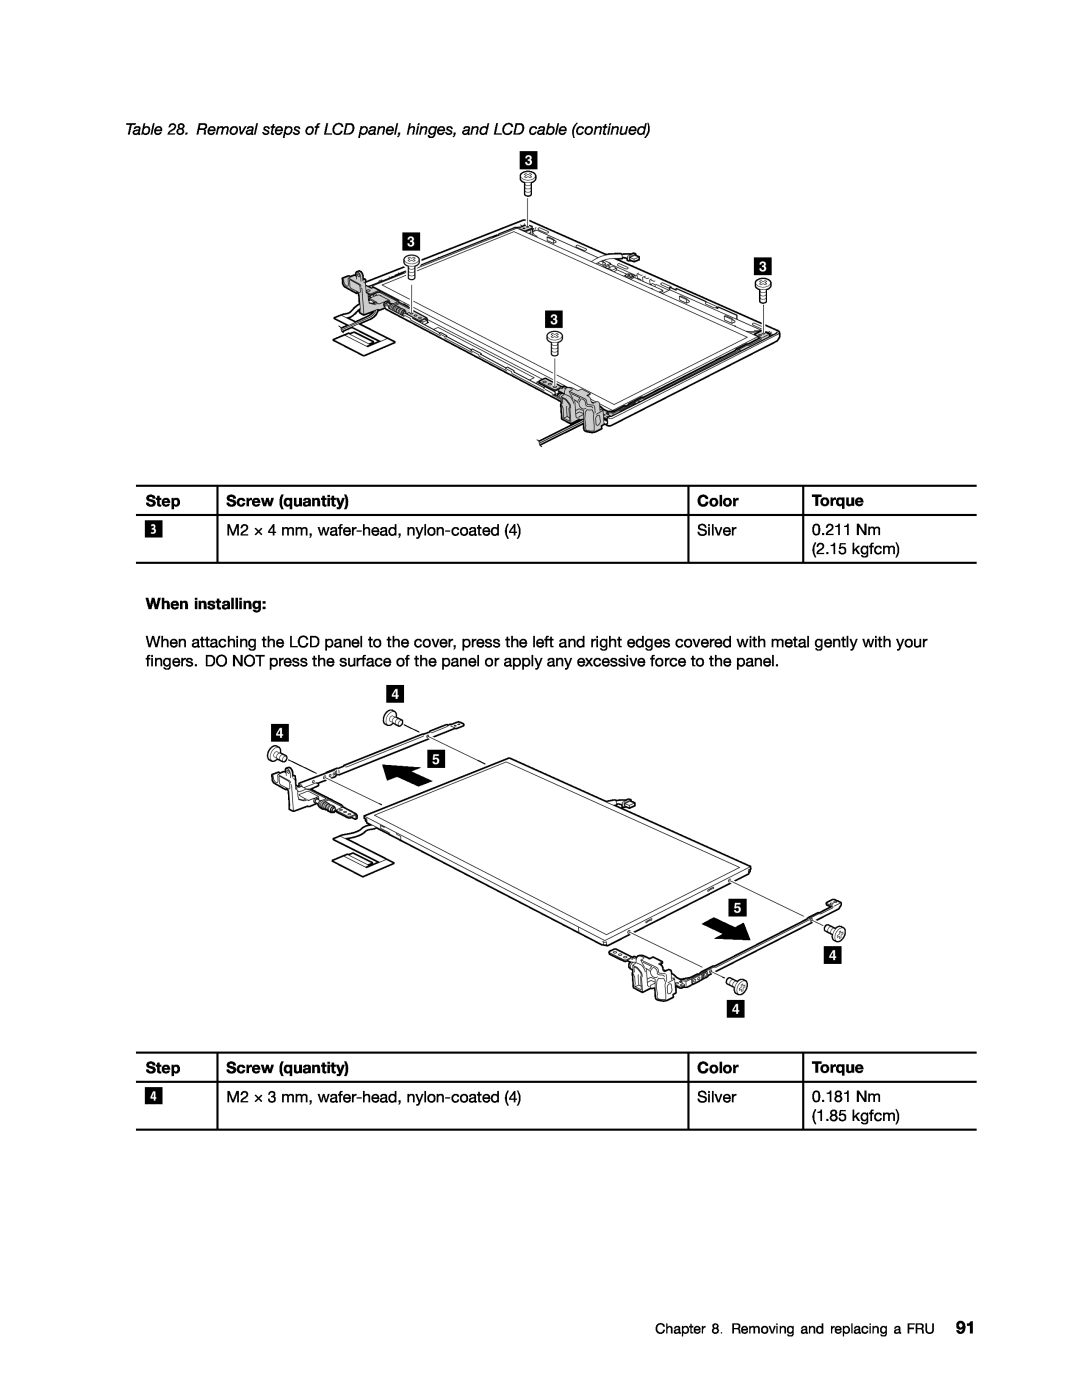 Lenovo E10 manual Removal steps of LCD panel, hinges, and LCD cable continued, Step, Screw quantity, Color, Torque 